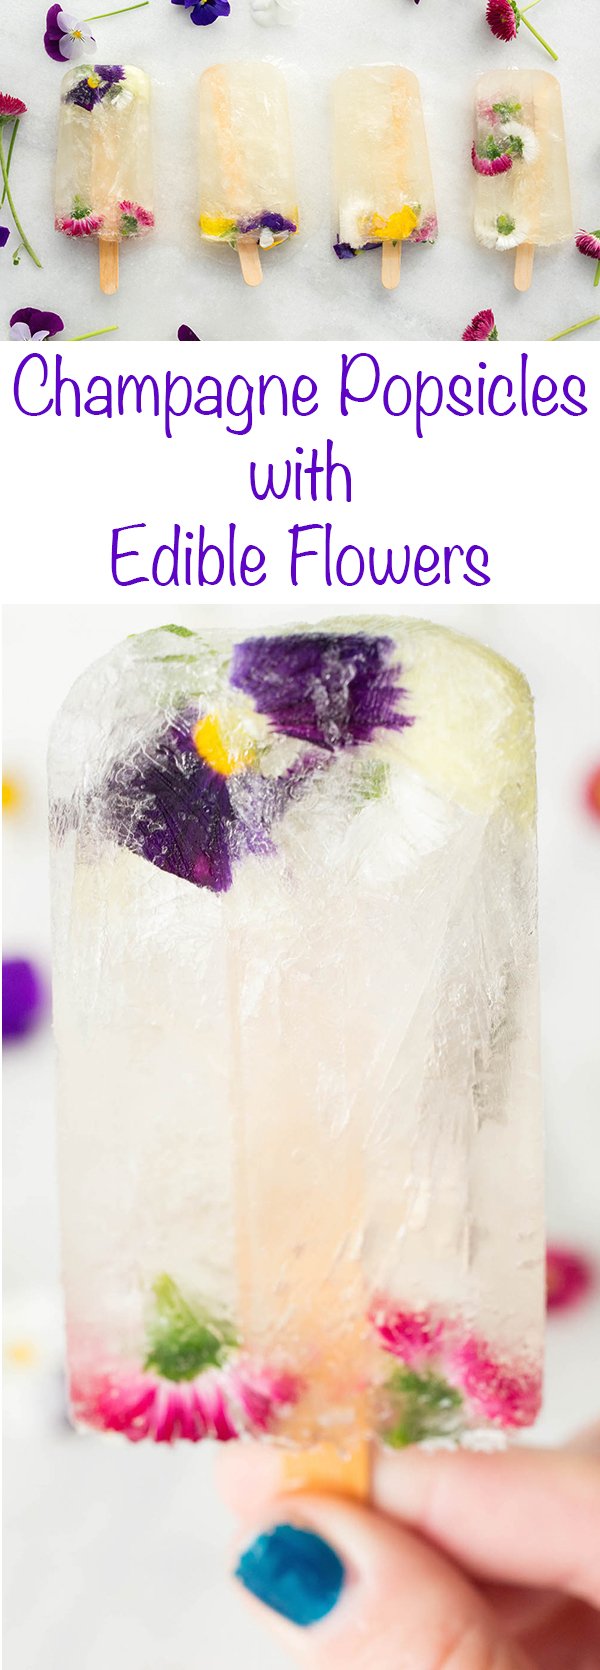 Champagne Popsicle recipe made with St. Germain and Edible Flowers. The perfect summer brunch treat!